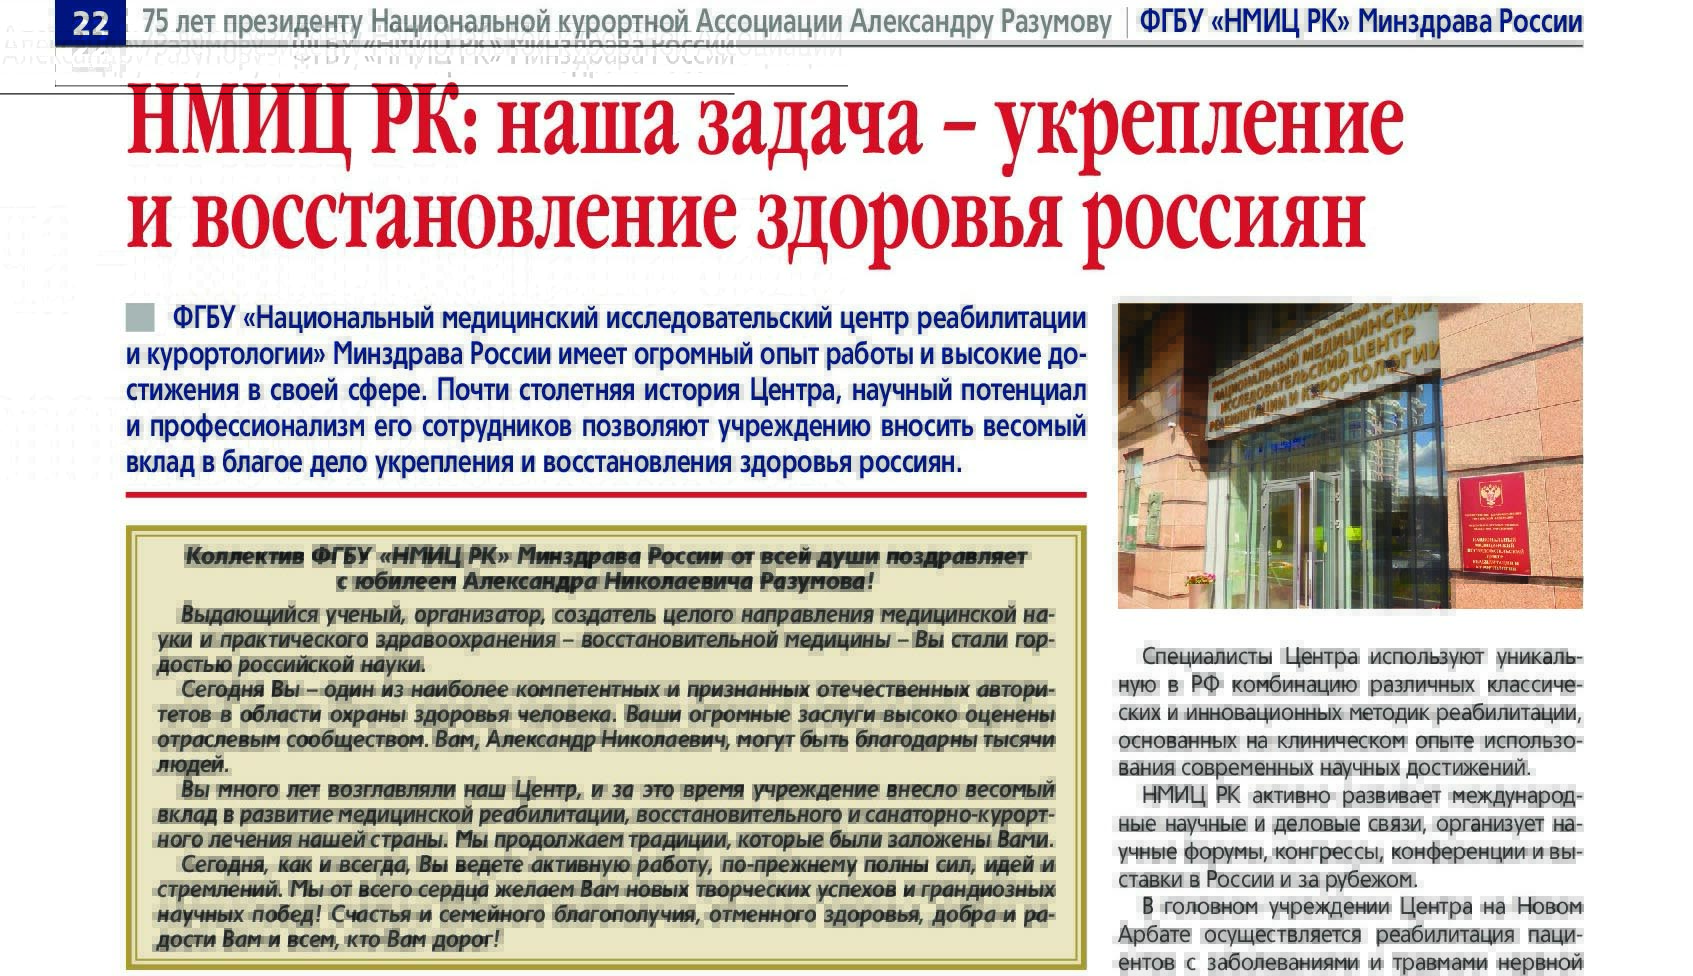 The federal publication "Delovaya Rossiya" published an article on the activities of the FSBI "NMRC RB" of the Ministry of Health of Russia